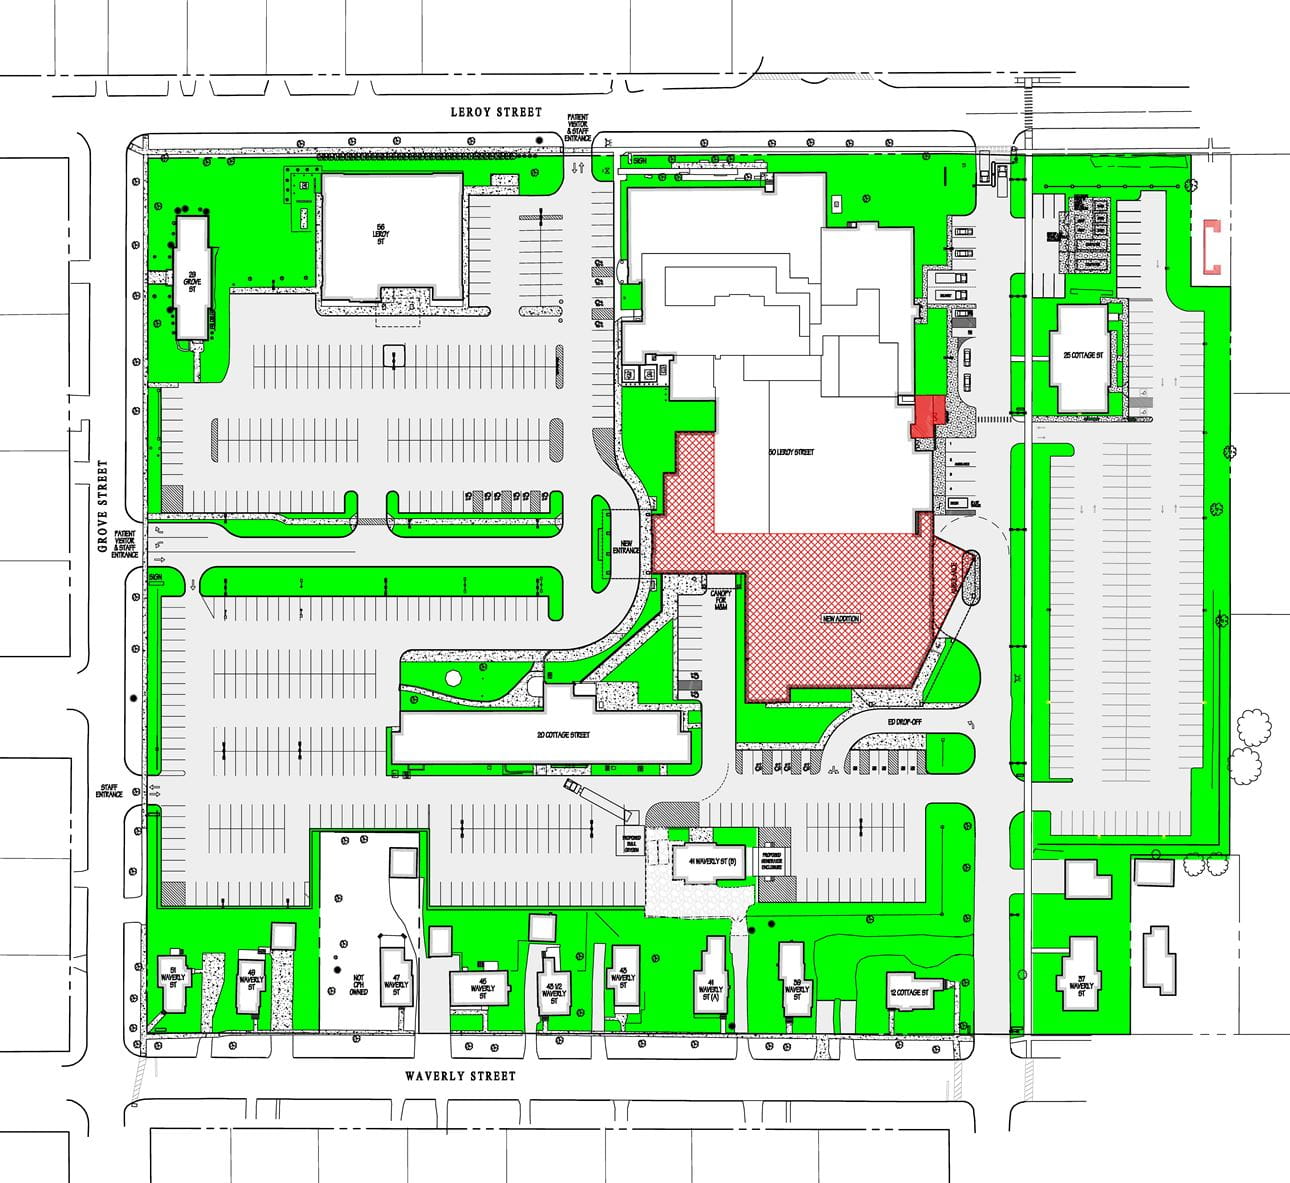 (Above) The section in red indicates the proposed expansion portions of the project; the new Main Entrance, and enlarged Emergency Department. [draft]